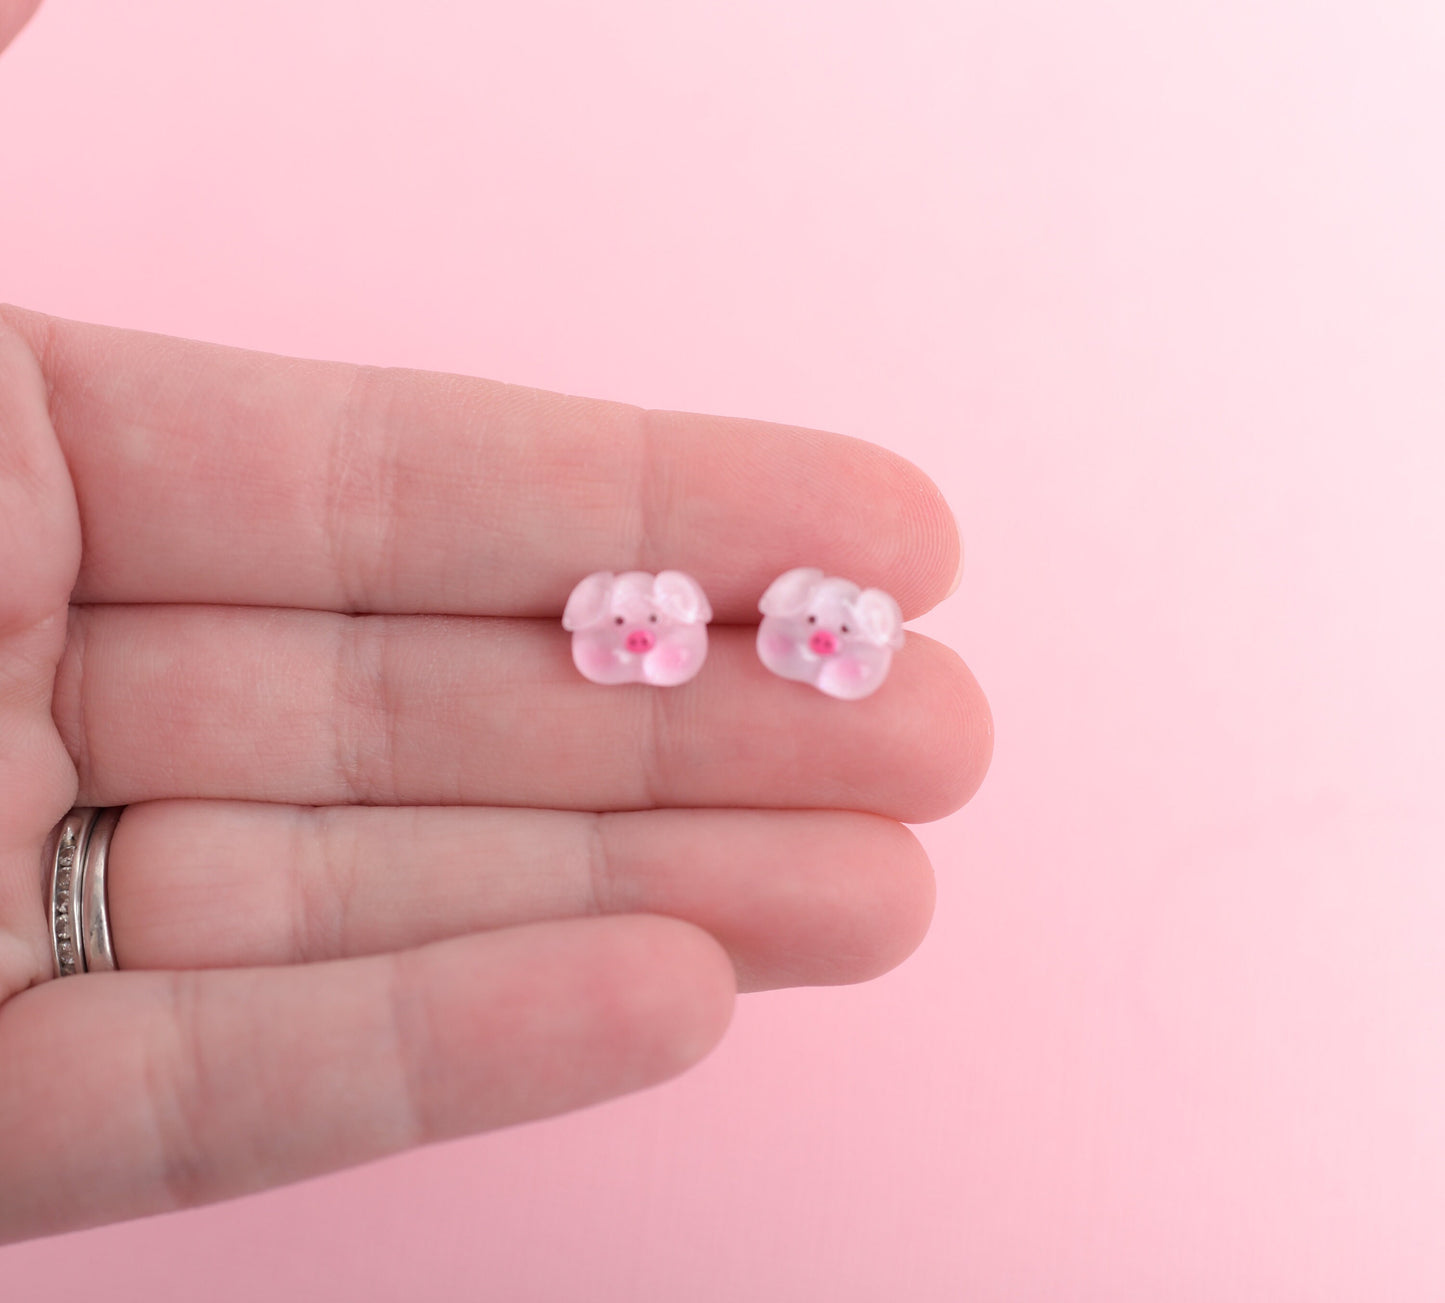 Little Shiny Pig Earrings with Titanium Posts